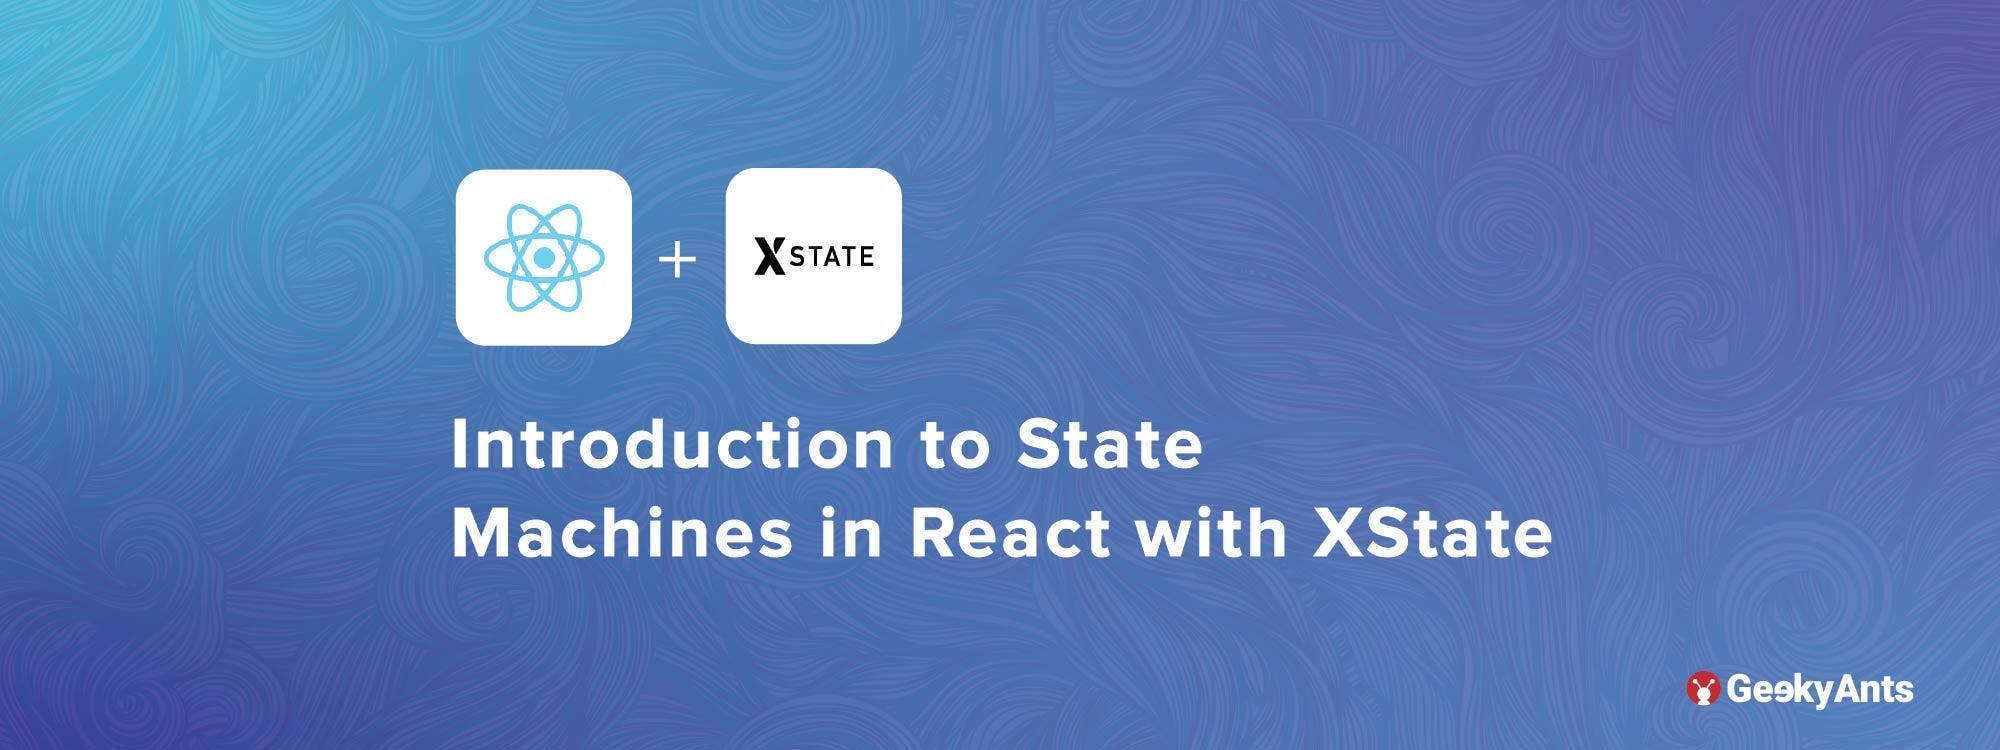 Introduction to State Machines in React with XState